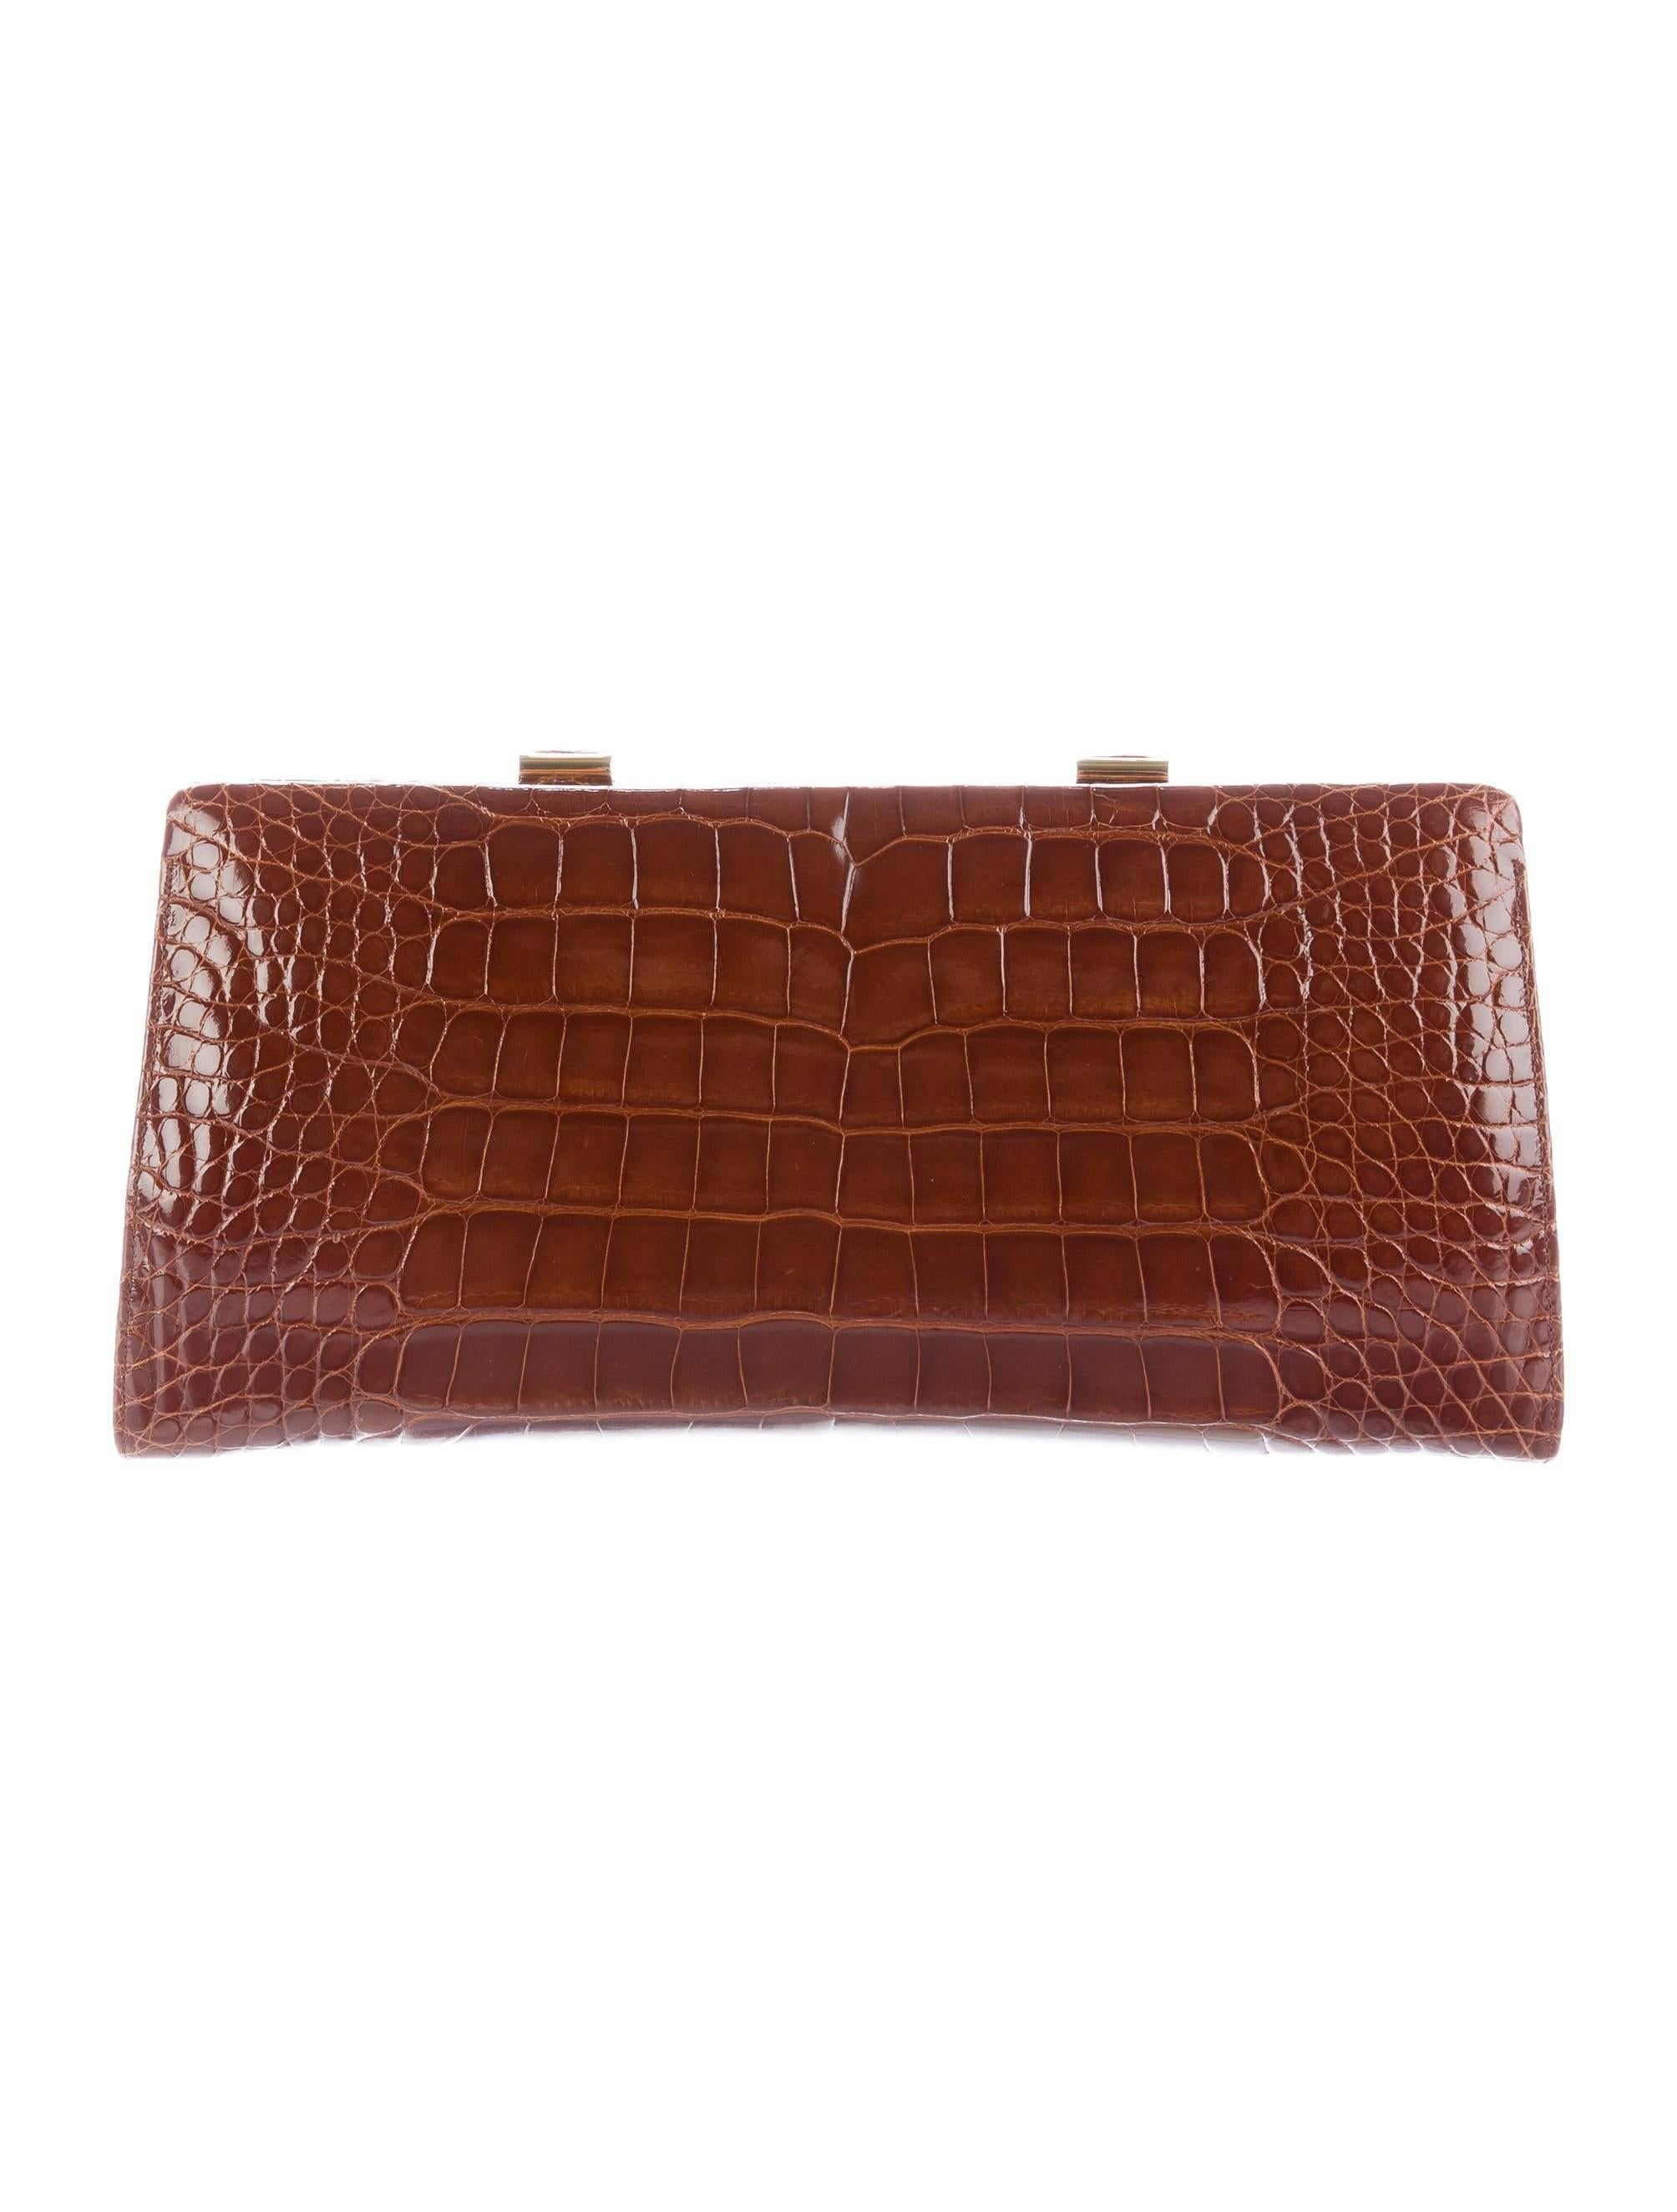 CURATOR'S NOTES

Judith Leiber New Cognac Alligator Pearl Crystal  Evening Shoulder Clutch Bag

Alligator
Gold tone hardware
Faux pearl
Crystal
Leather lining
Push lock closure
Features drop in shoulder strap and interior coin purse
Shoulder strap